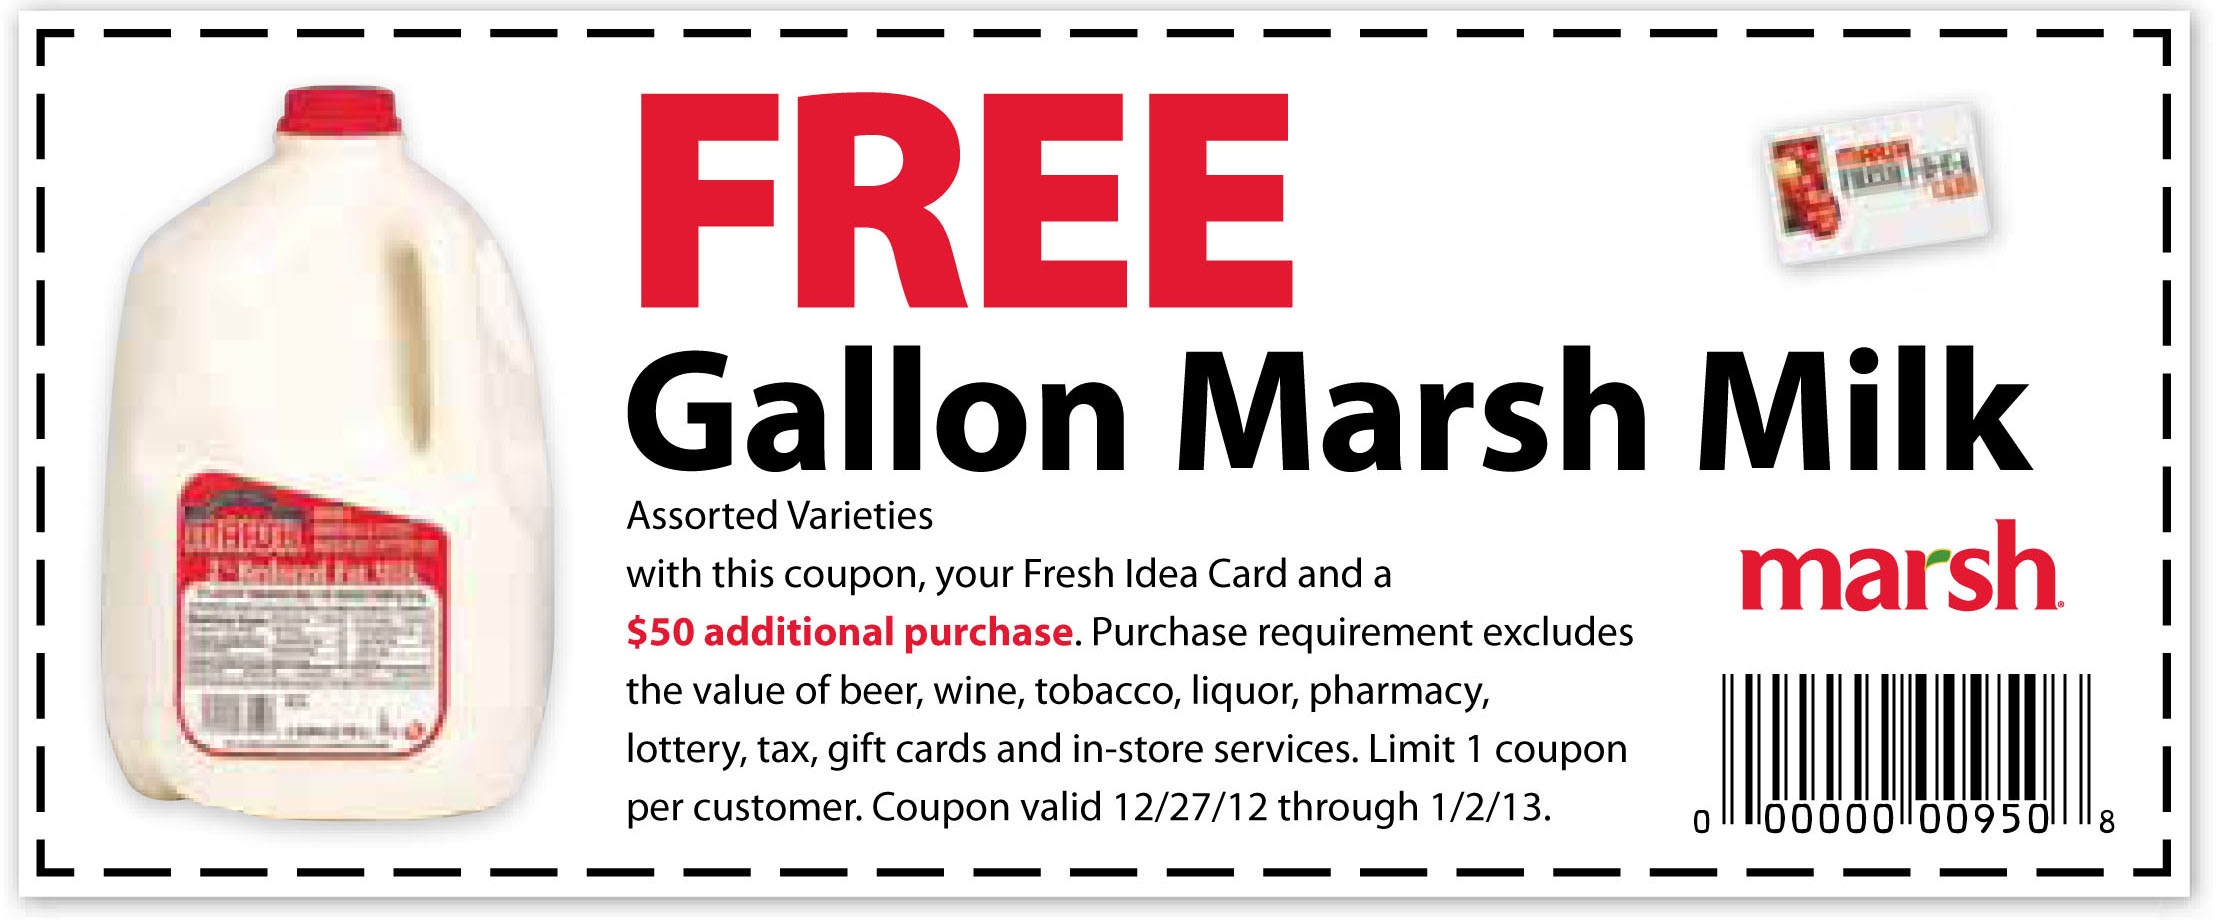 Stopnshop-Free-Silkmilk-Coupon-Valid-Ongoing-2018 - Free Printable Beer Coupons